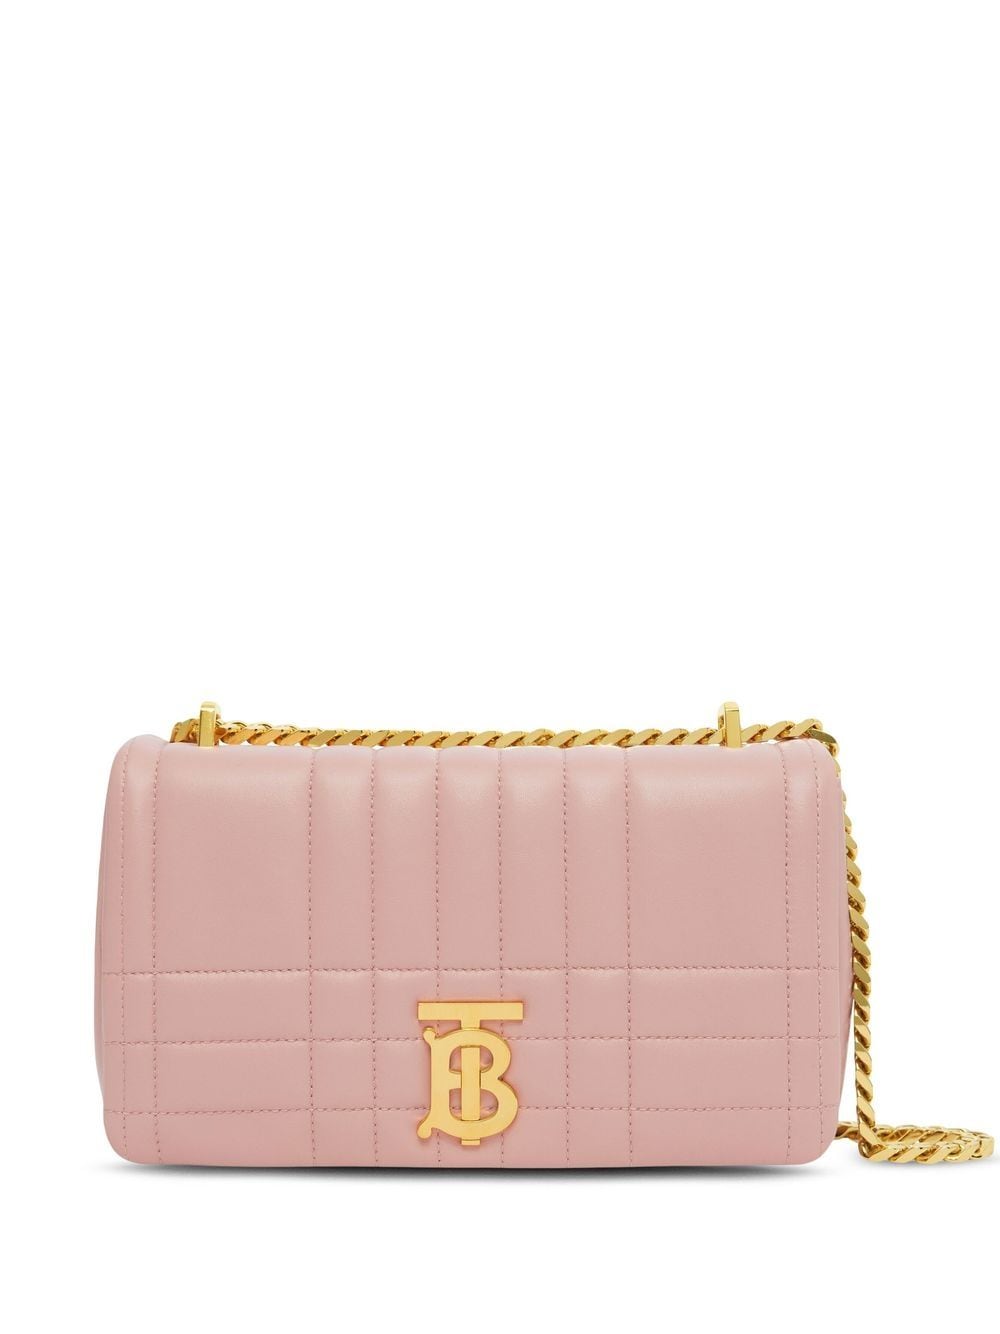 Burberry quilted leather small Lola bag - Pink von Burberry